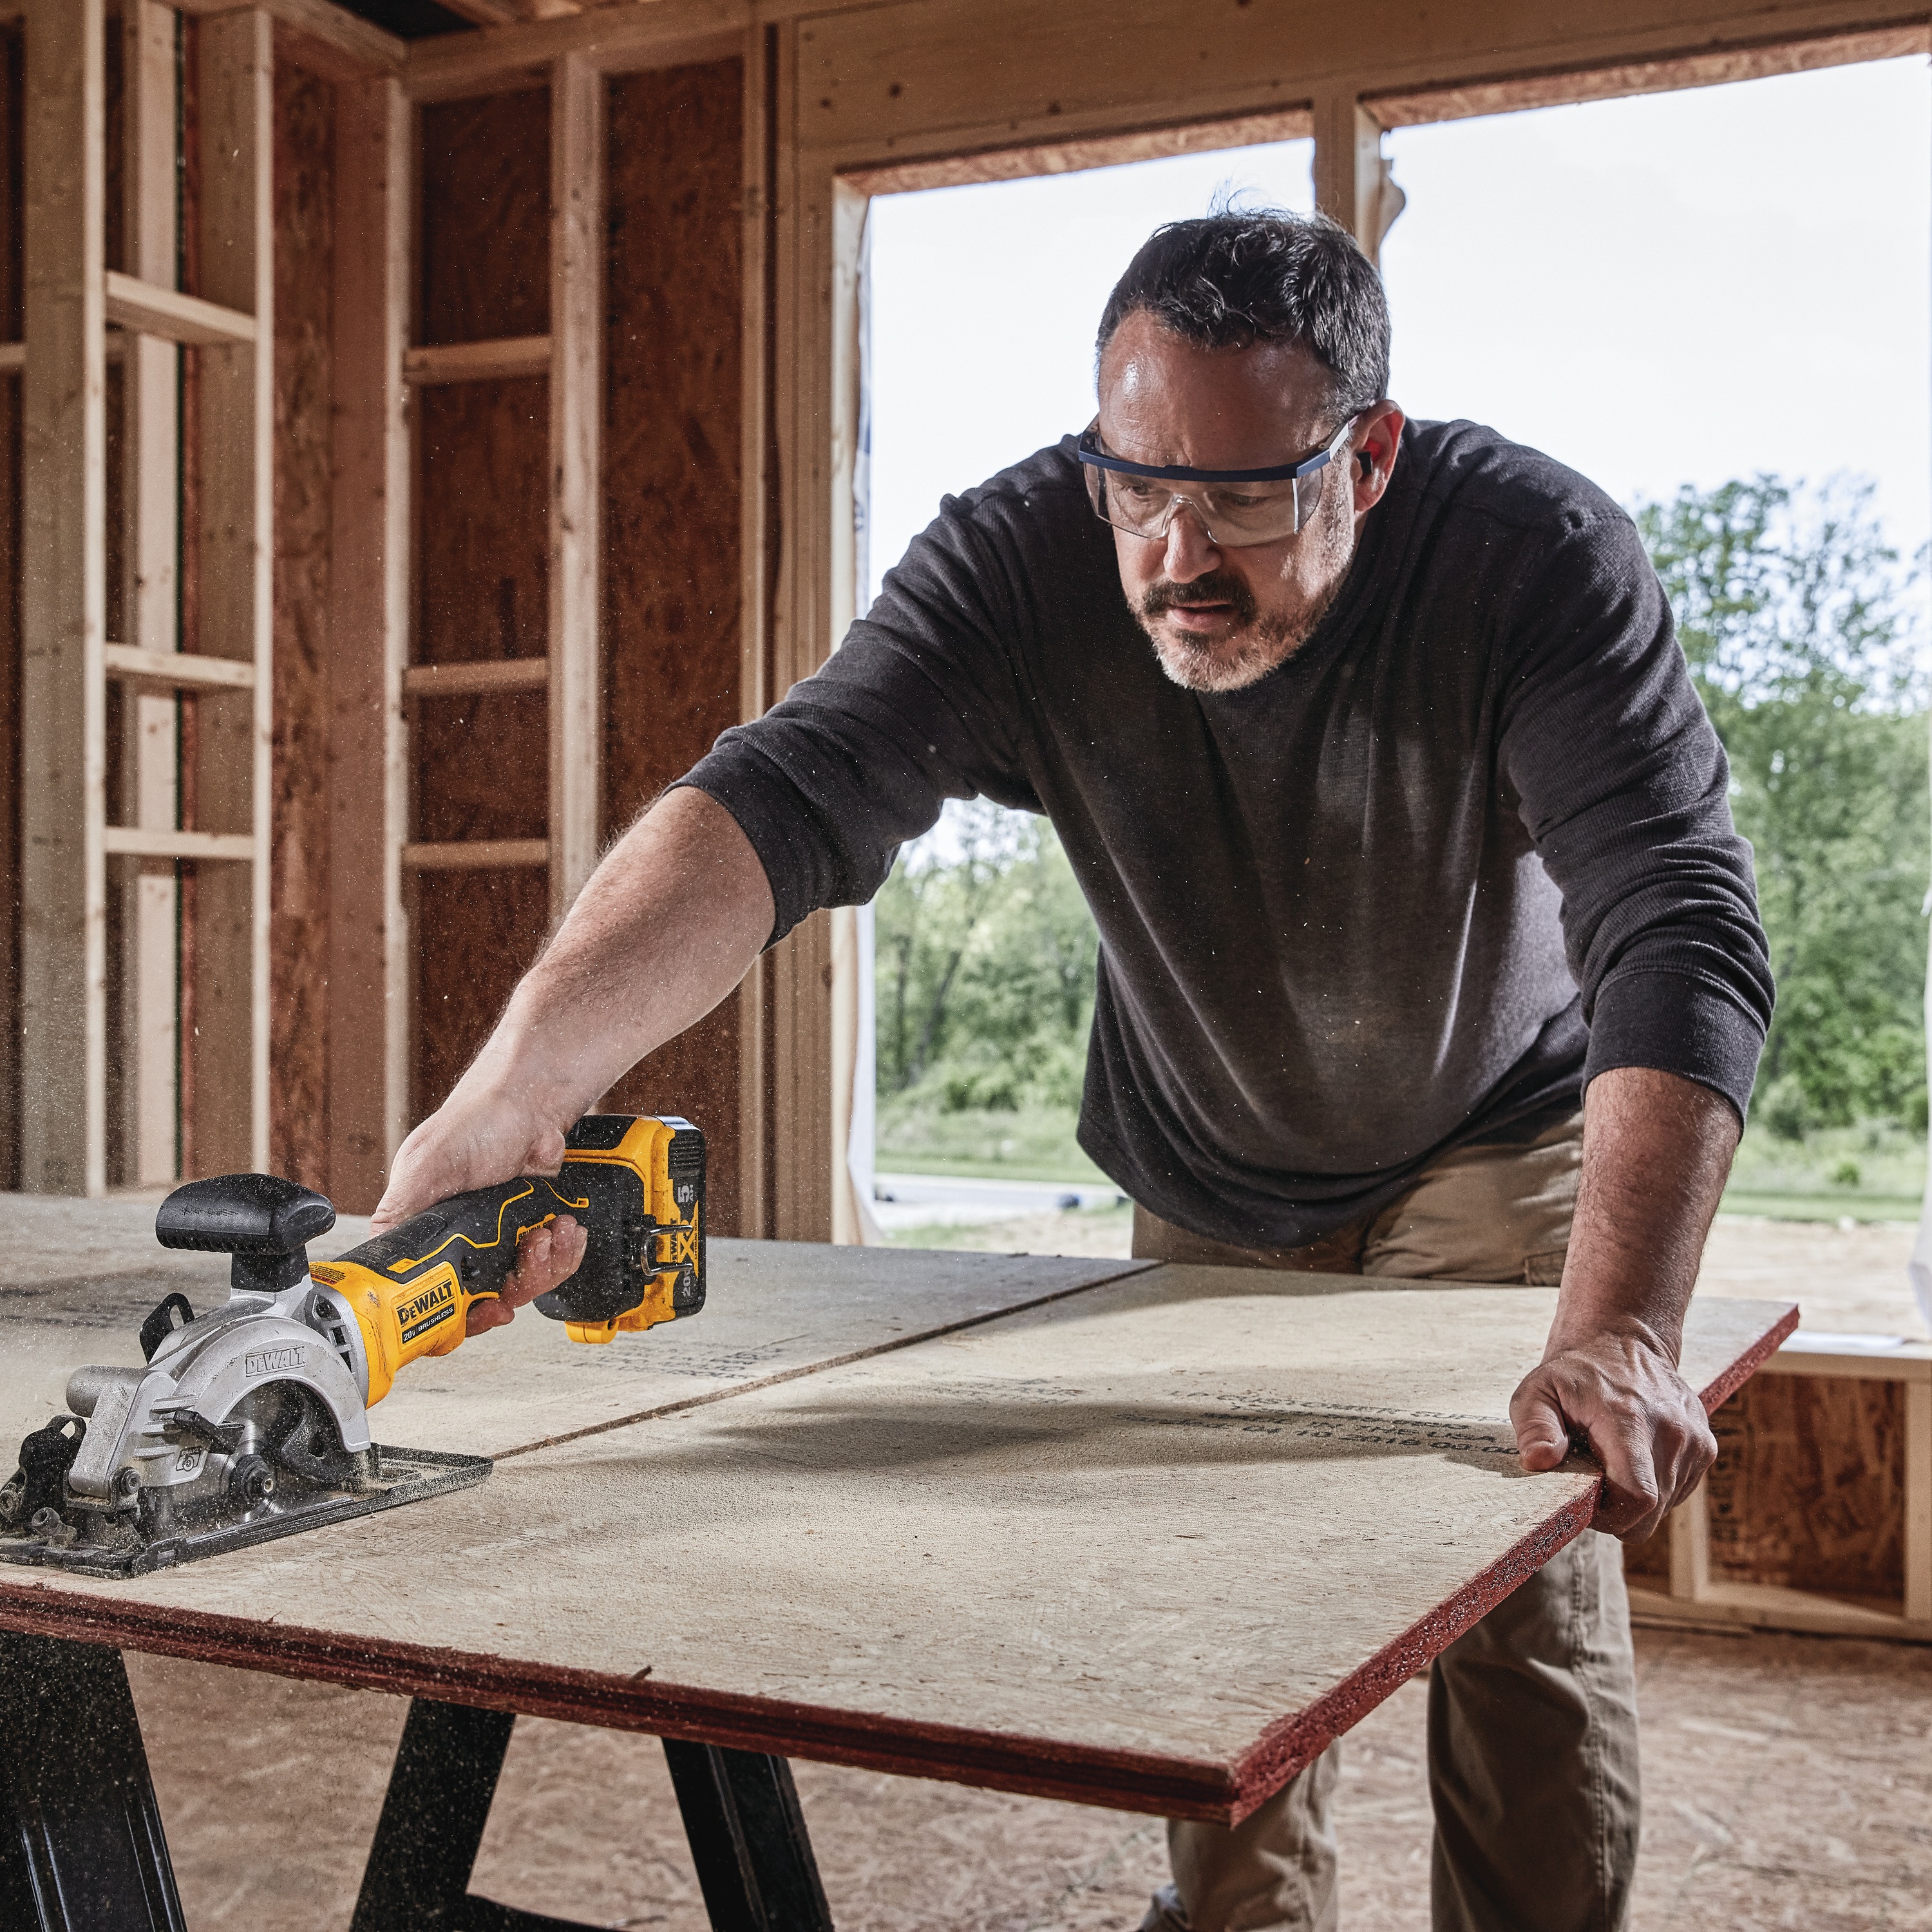 ATOMIC brushless cordless circular saw being used by person on wooden board.